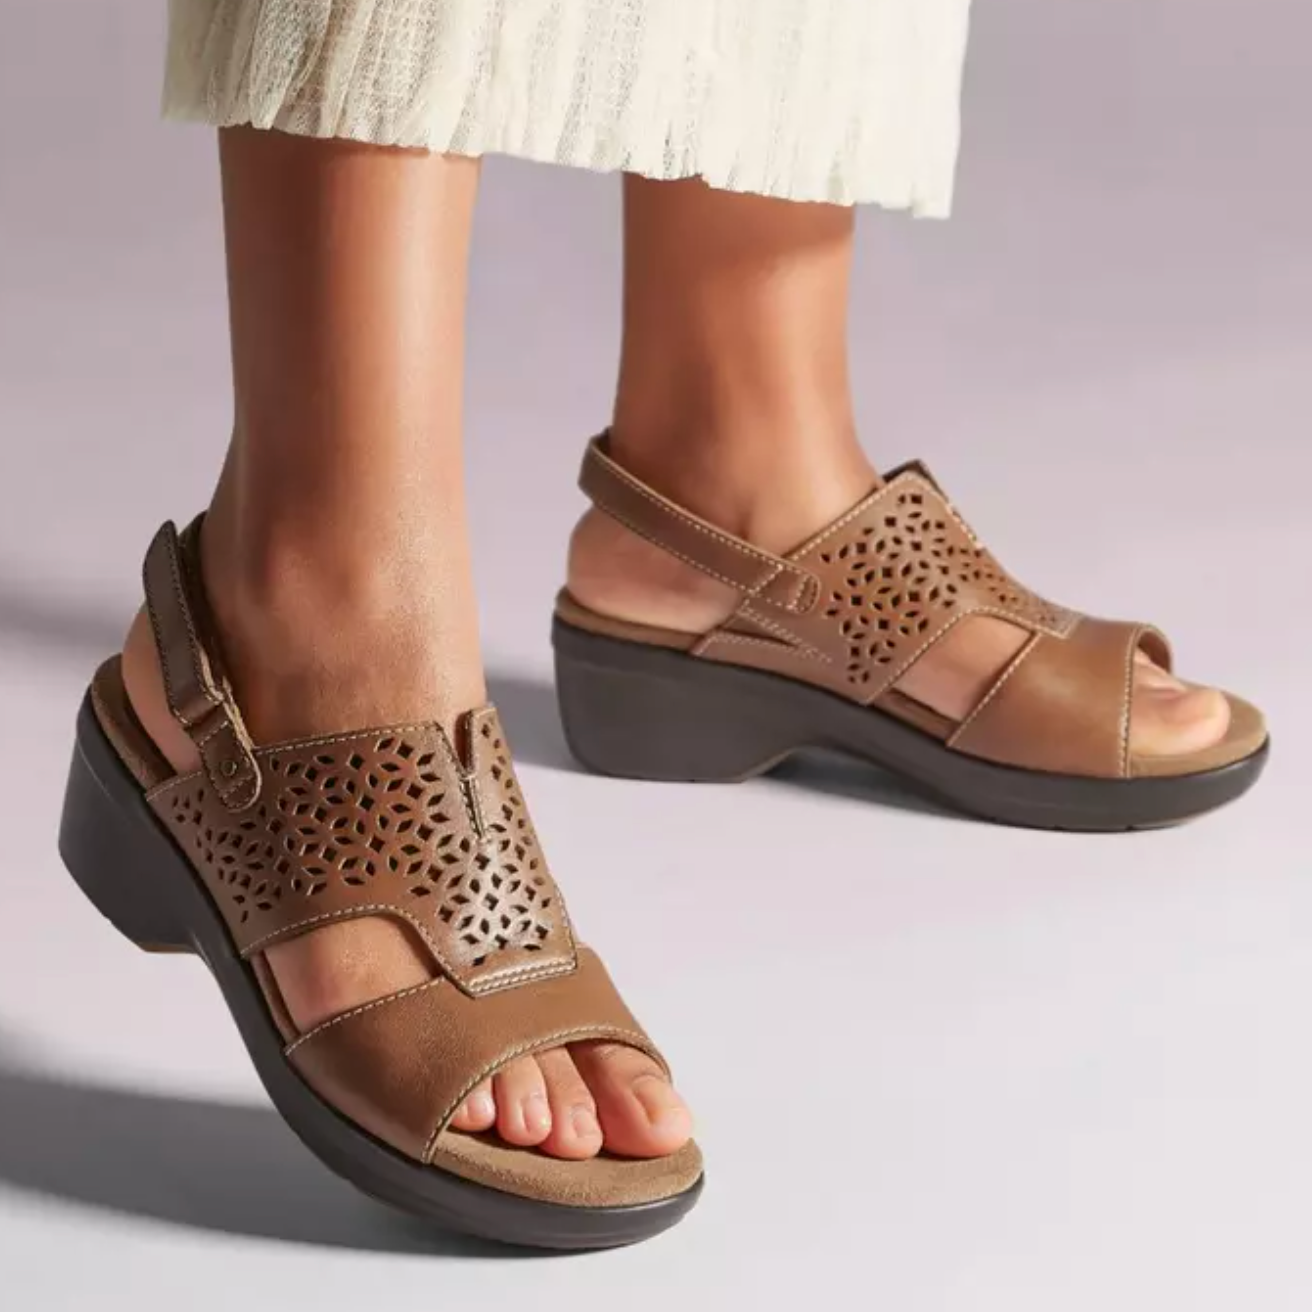 A pair of tan leather sandals with decorative cutouts and Velcro straps, worn by a person in a white skirt.